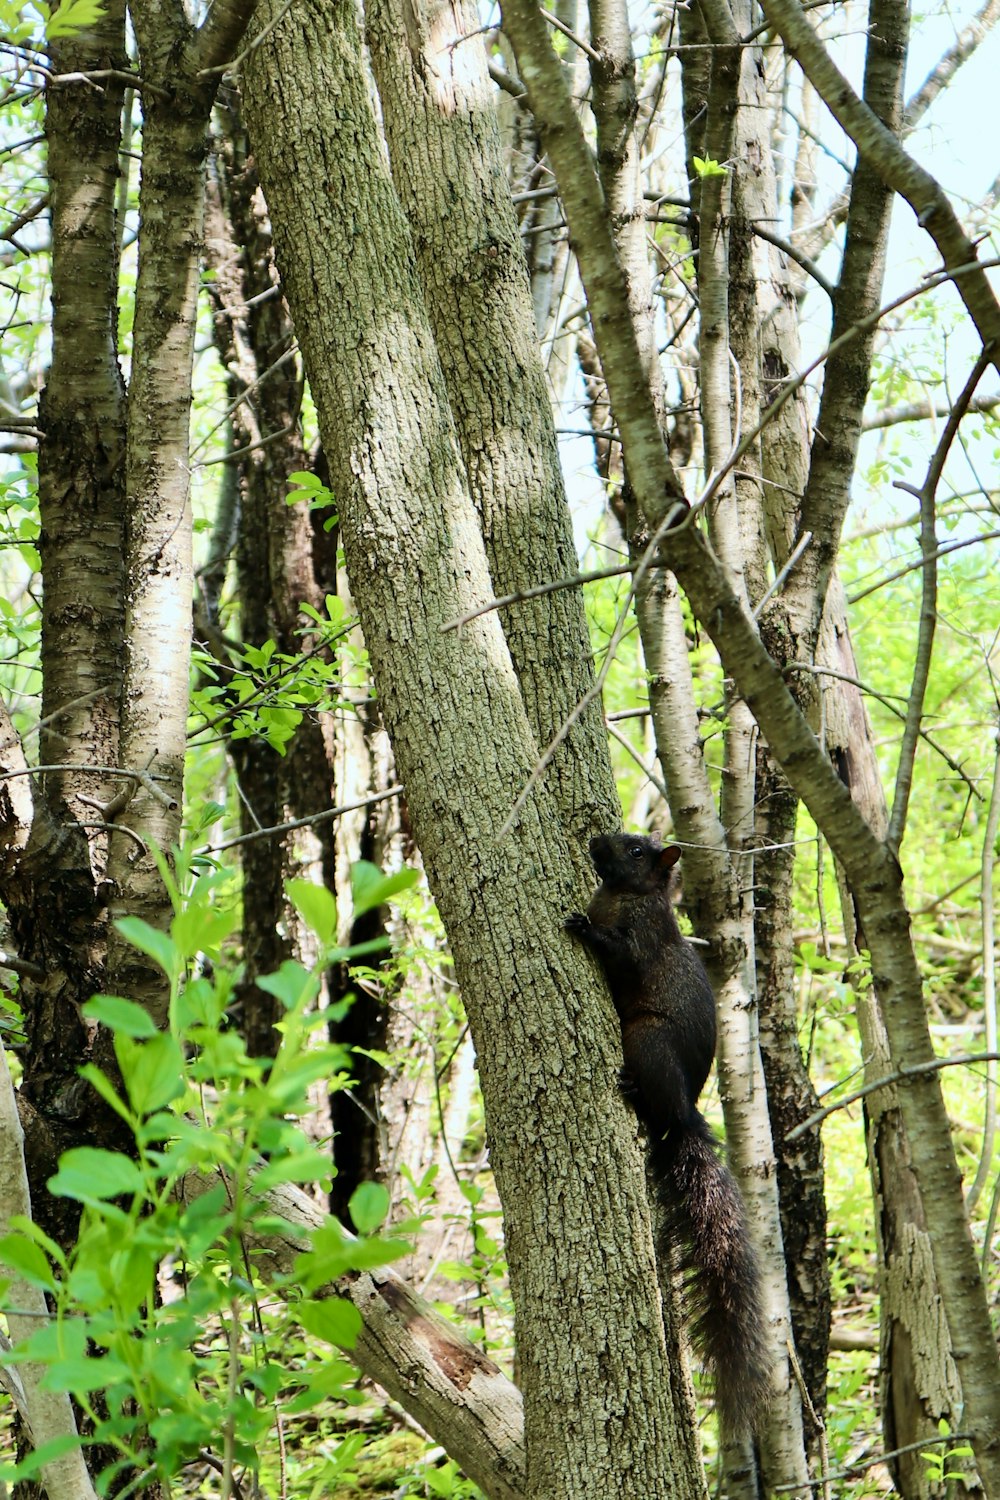 a black bear climbing up a tree in a forest